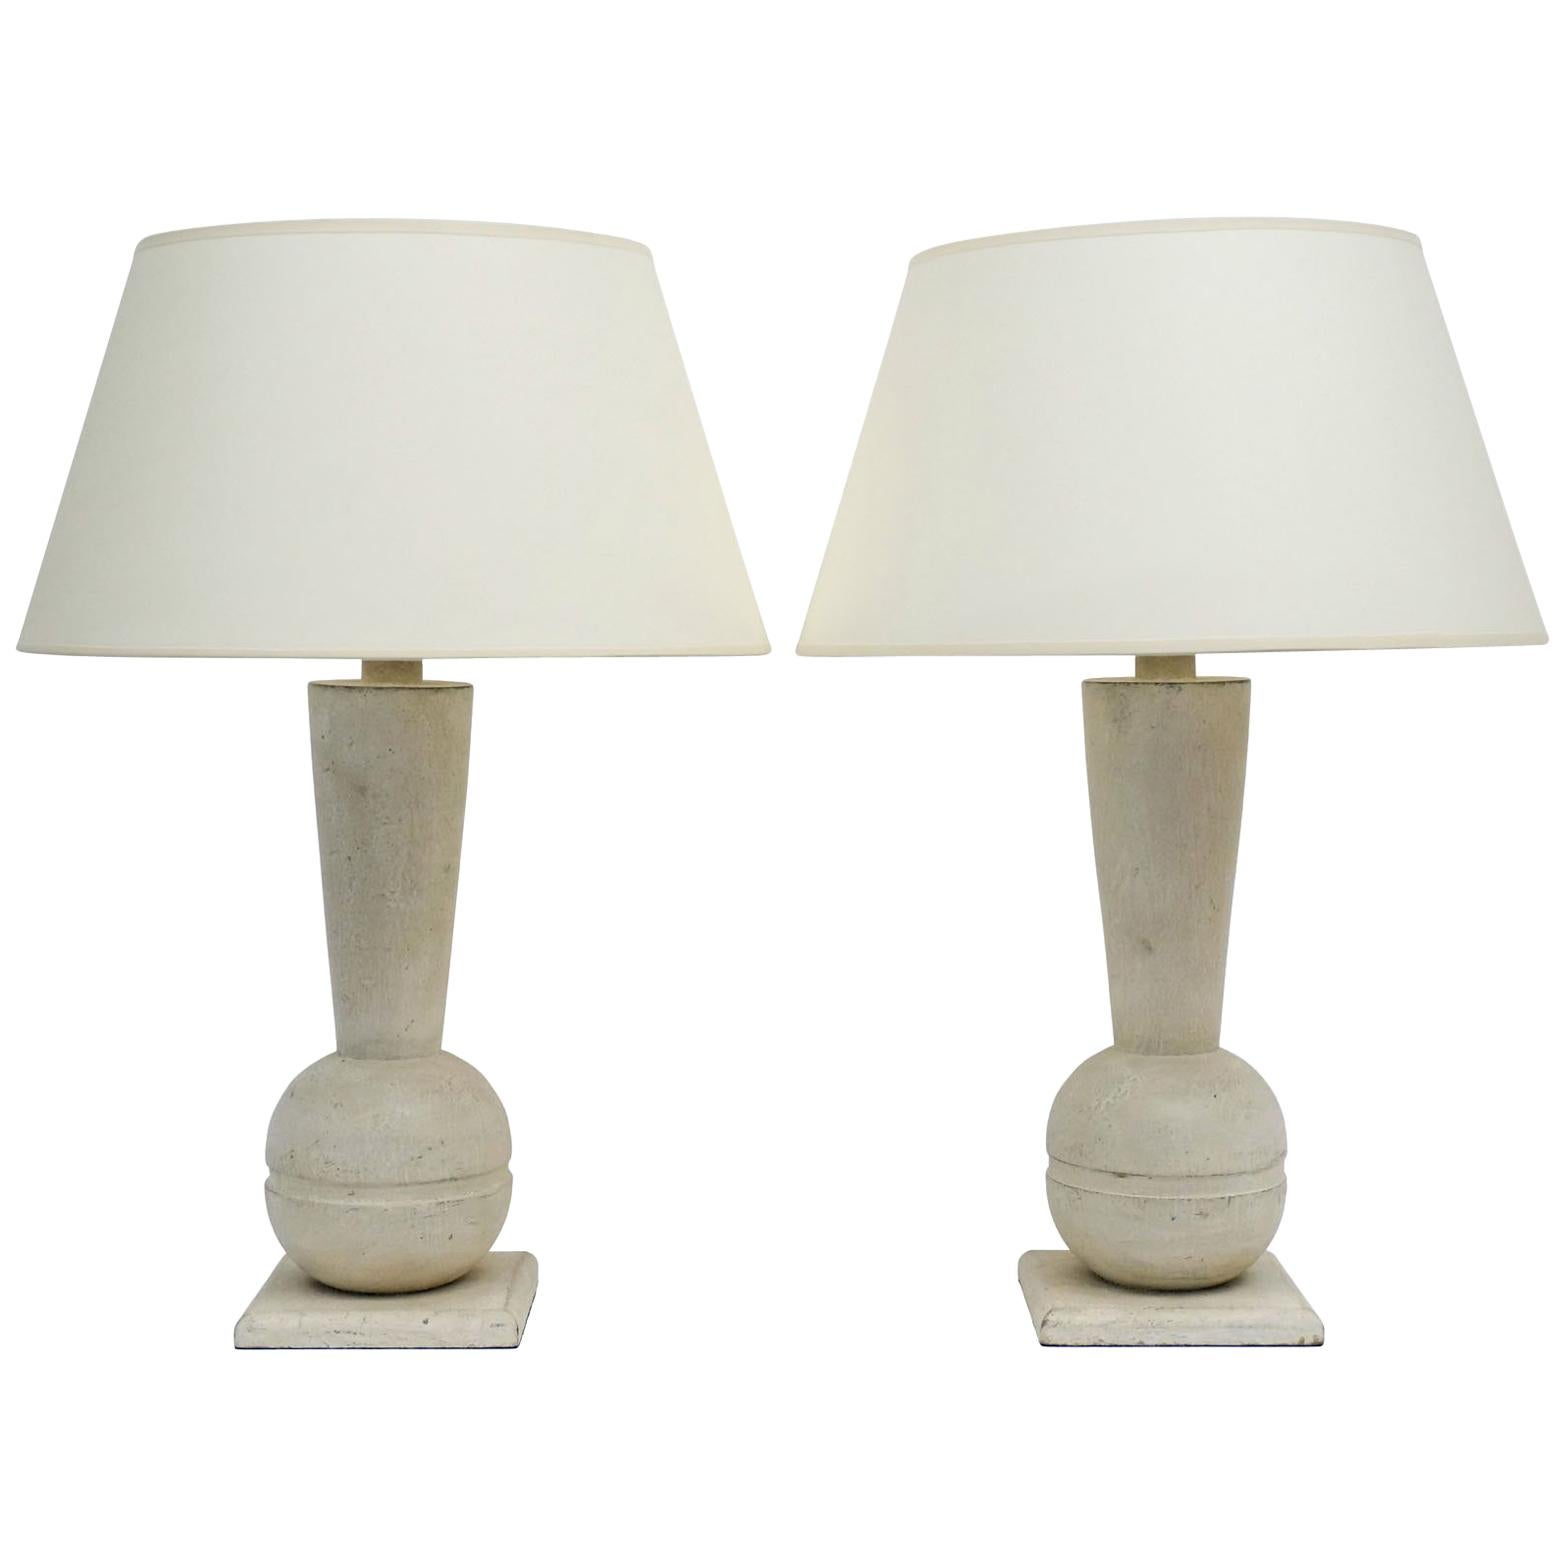 Pair of Painted White Turned Wood Table Lamps, Belgium